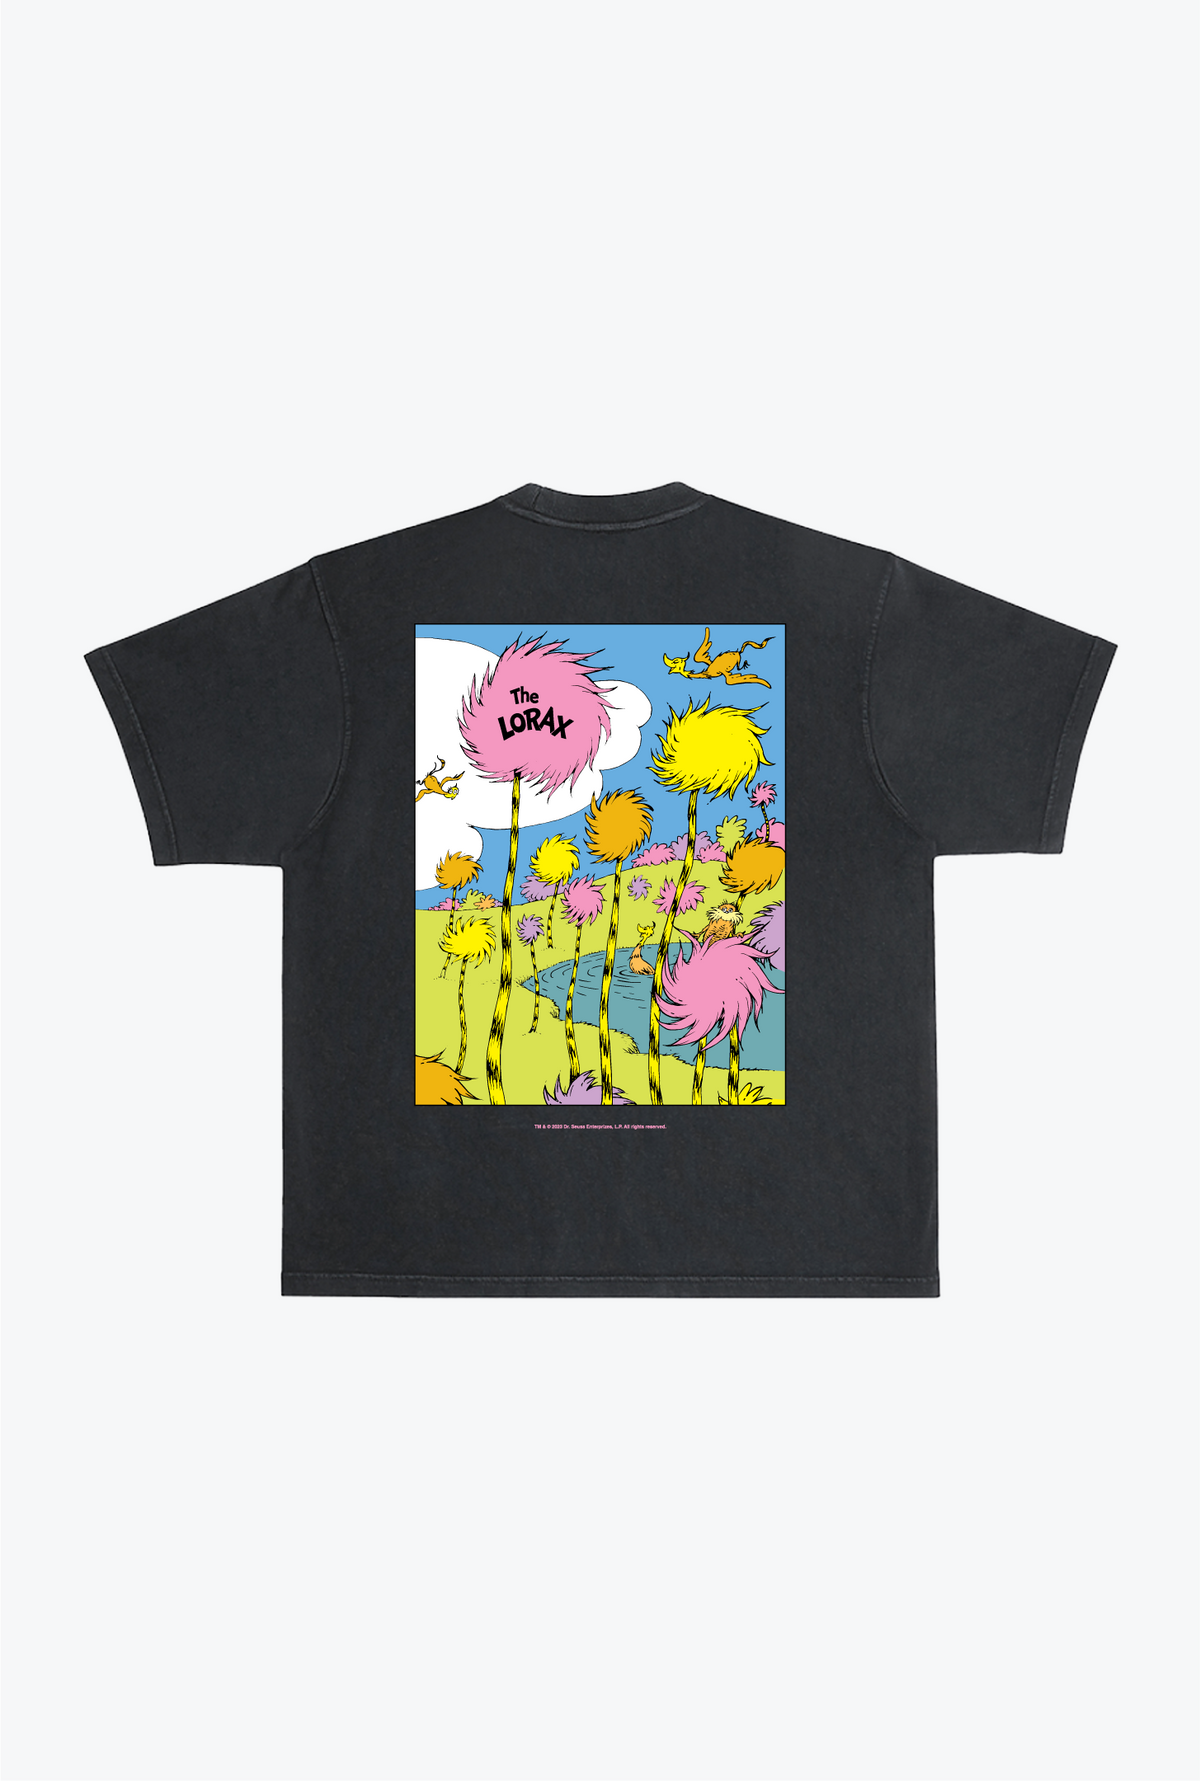 The Lorax Quote T-Shirt - Pigment Dye Black